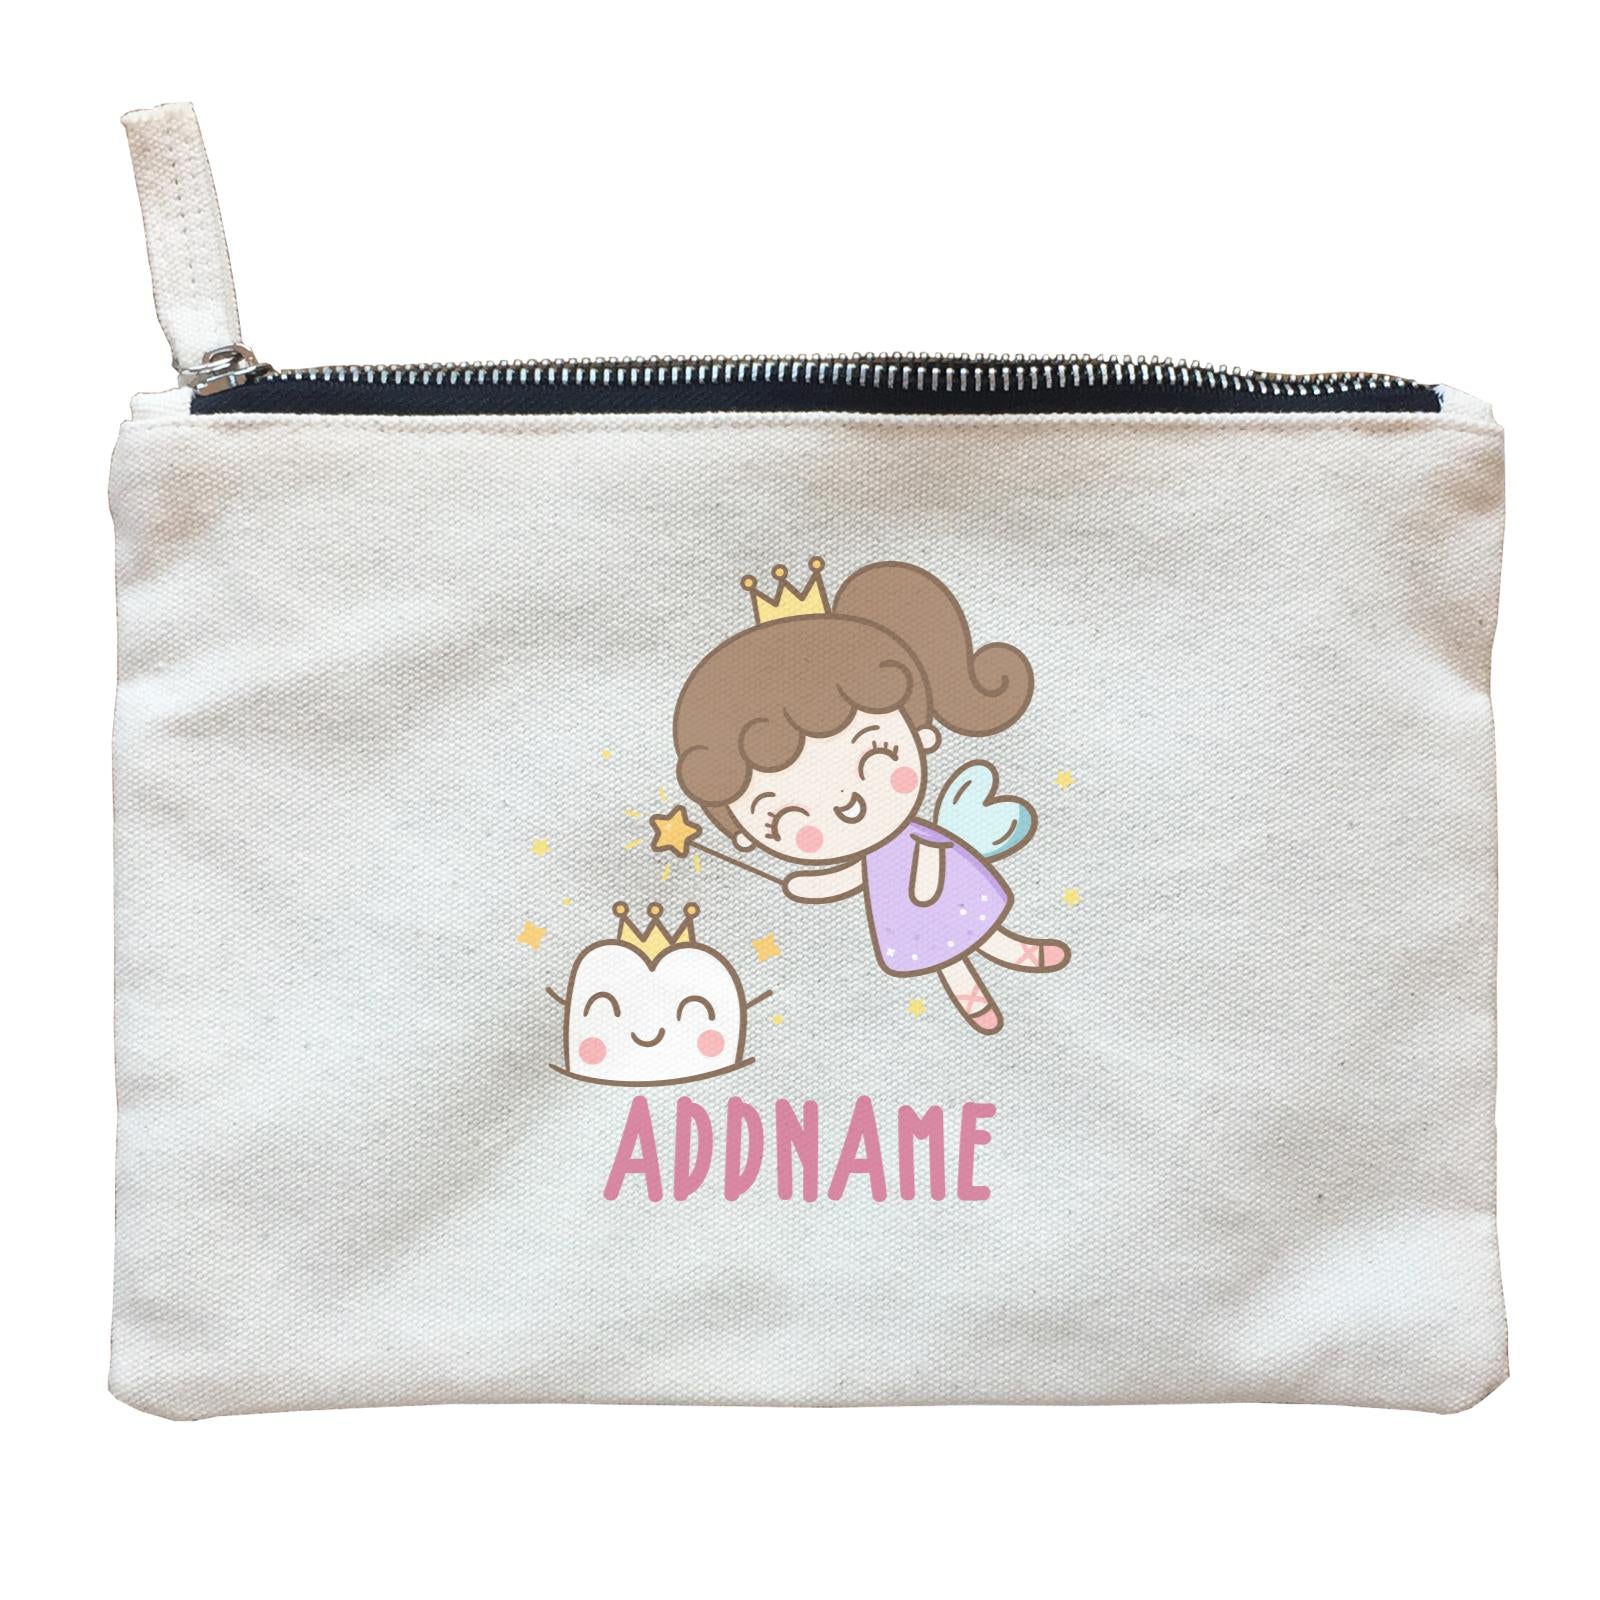 Unicorn And Princess Series Cute Tooth Fairy Addname Zipper Pouch